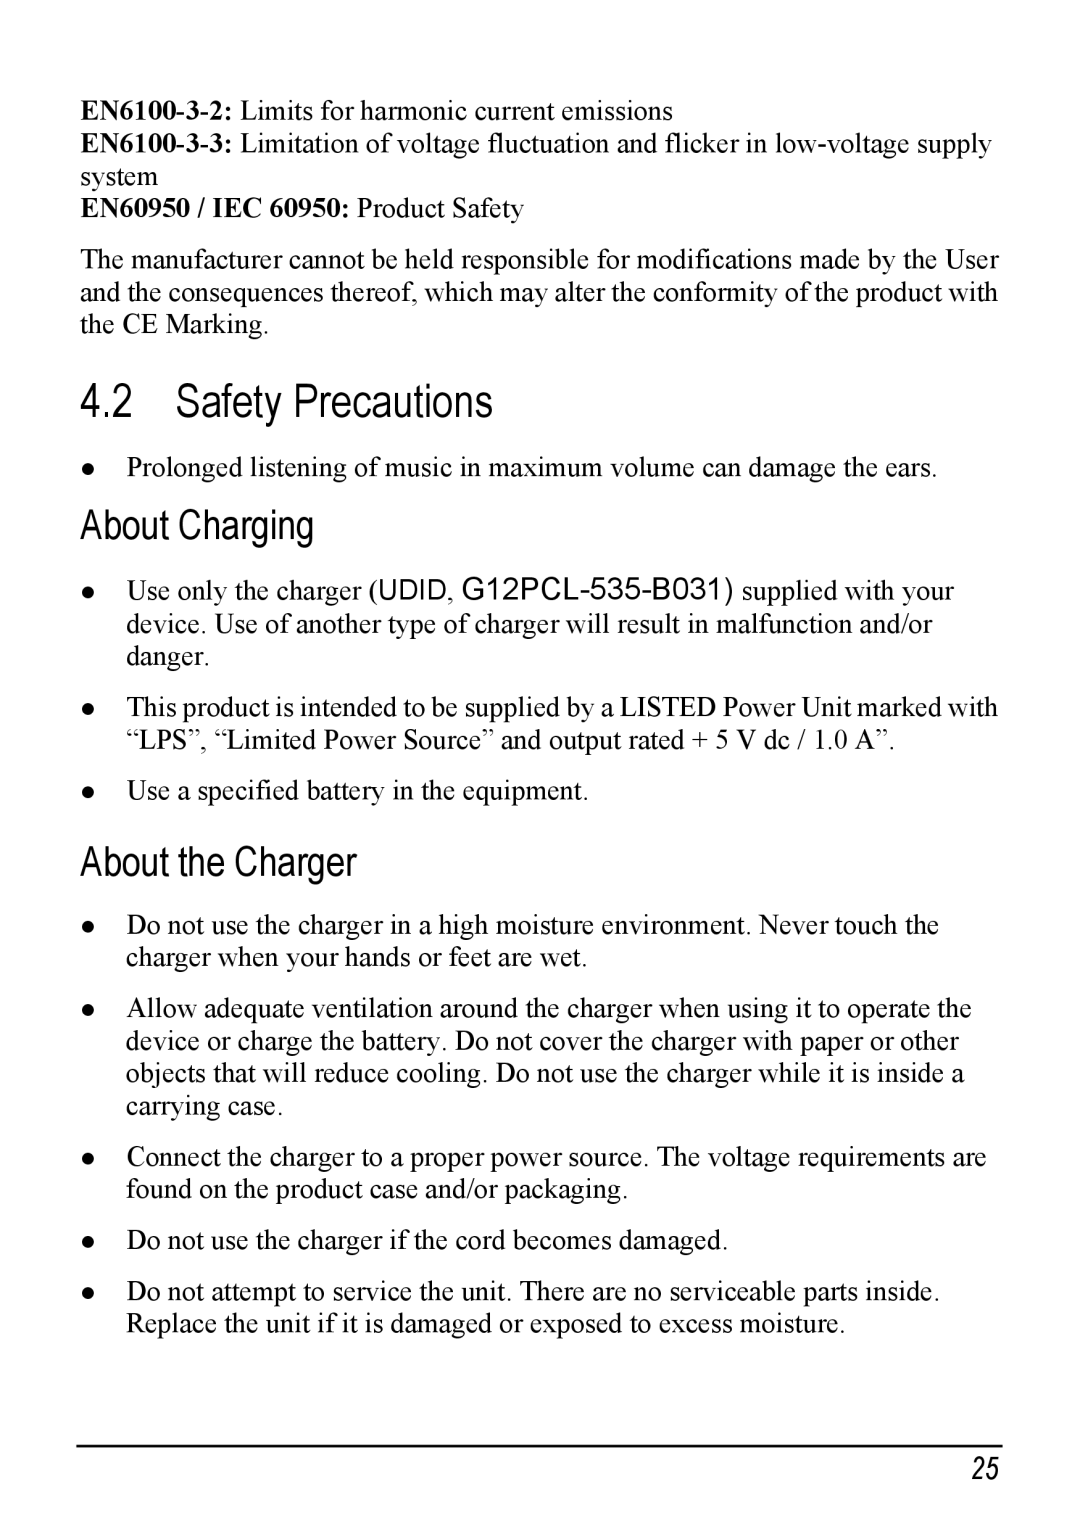 Jabra C220 manual Safety Precautions, About Charging, About the Charger, EN60950 / IEC 60950 Product Safety 